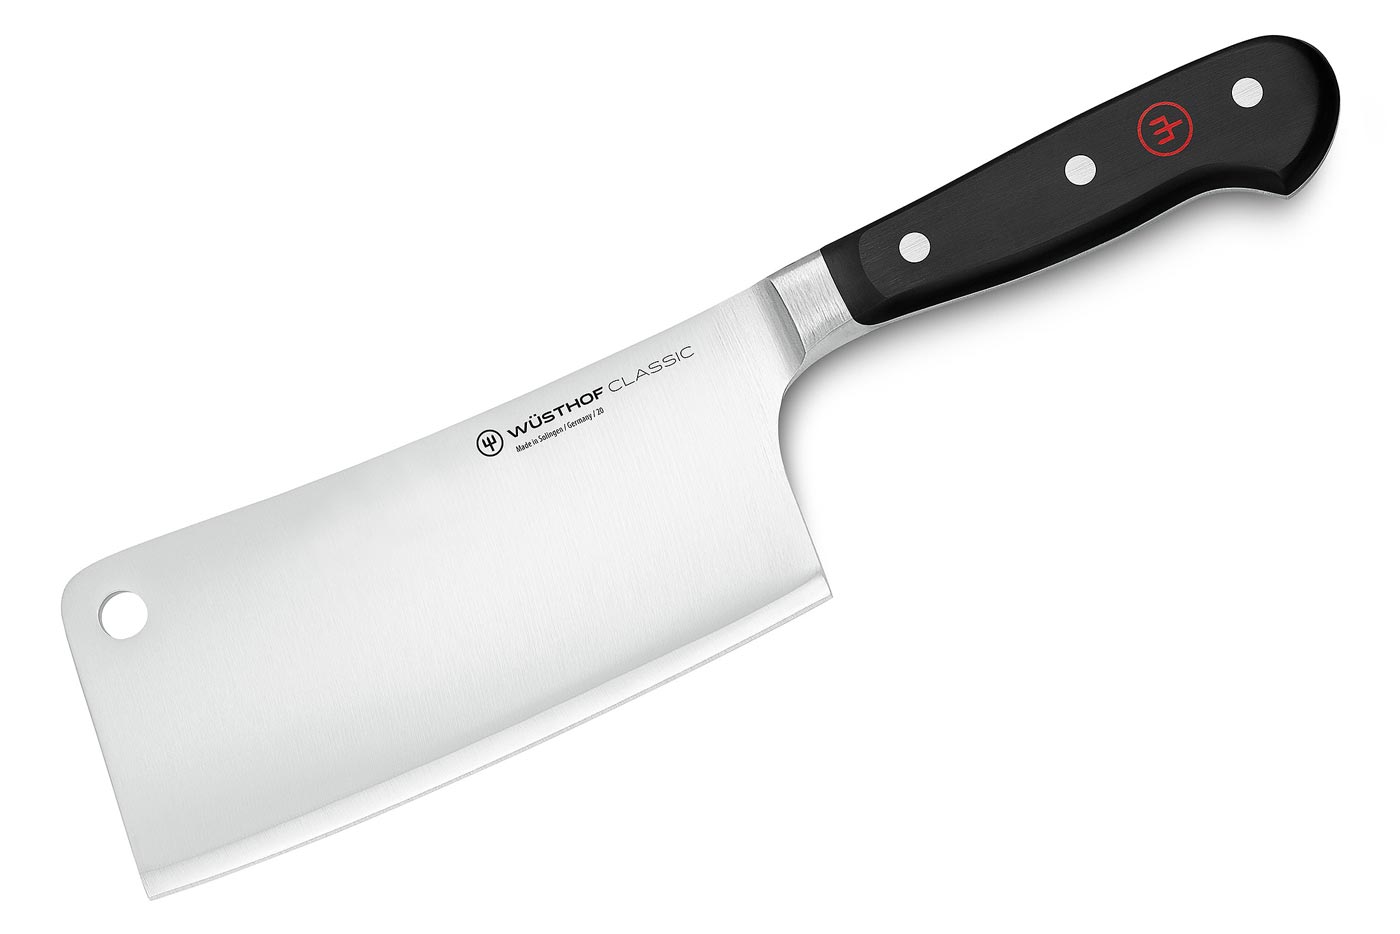 Wusthof-Trident Classic Meat Cleaver (1040102816)